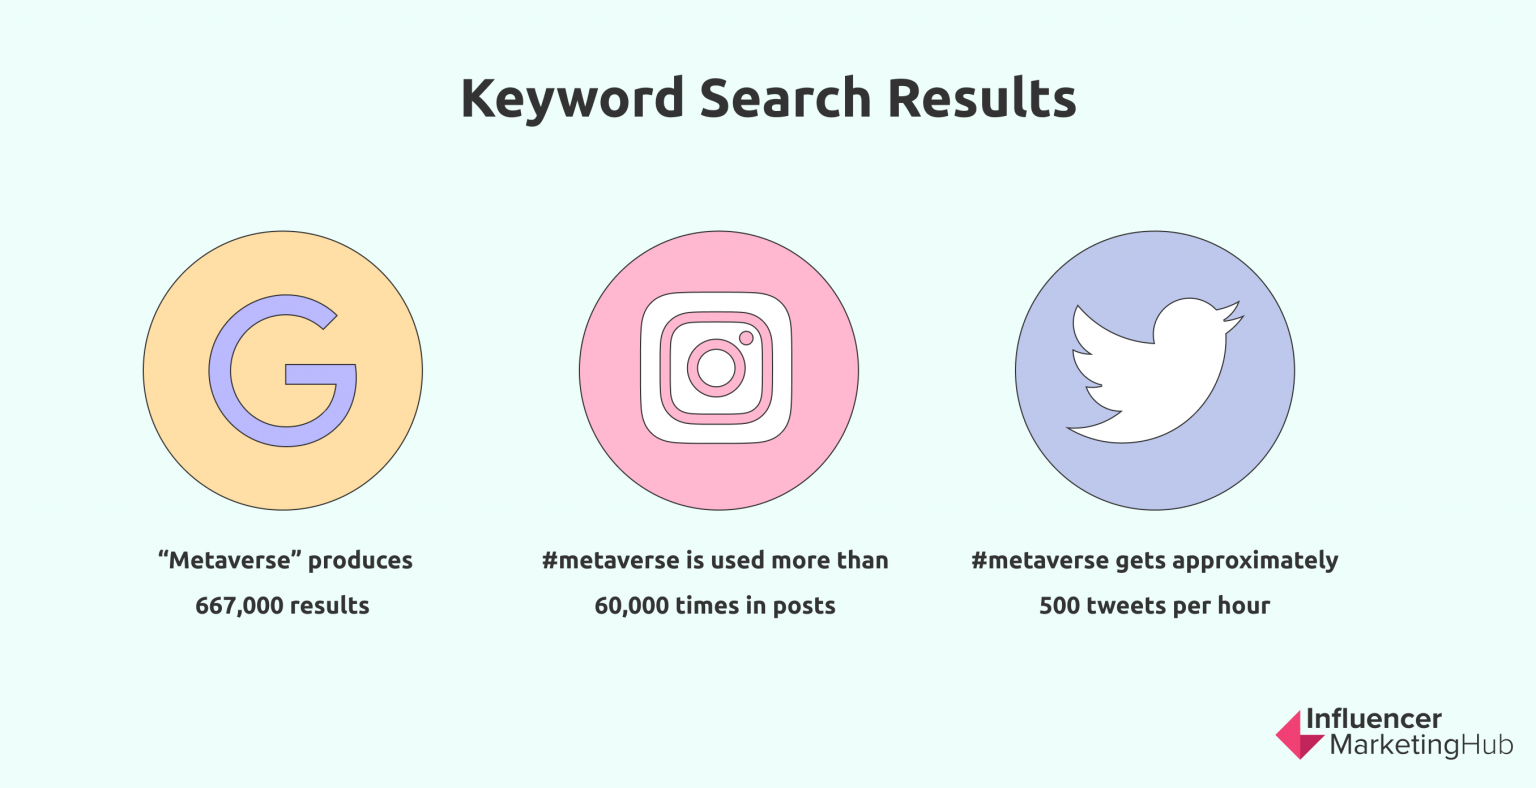 metaverse keywords in internet or social media searches.